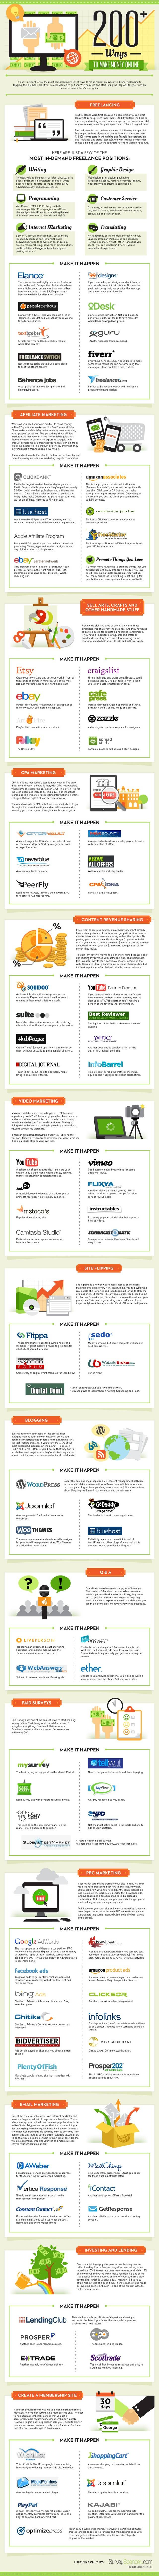 200+ Ways to Earn or Make Money Online! [Infographic]